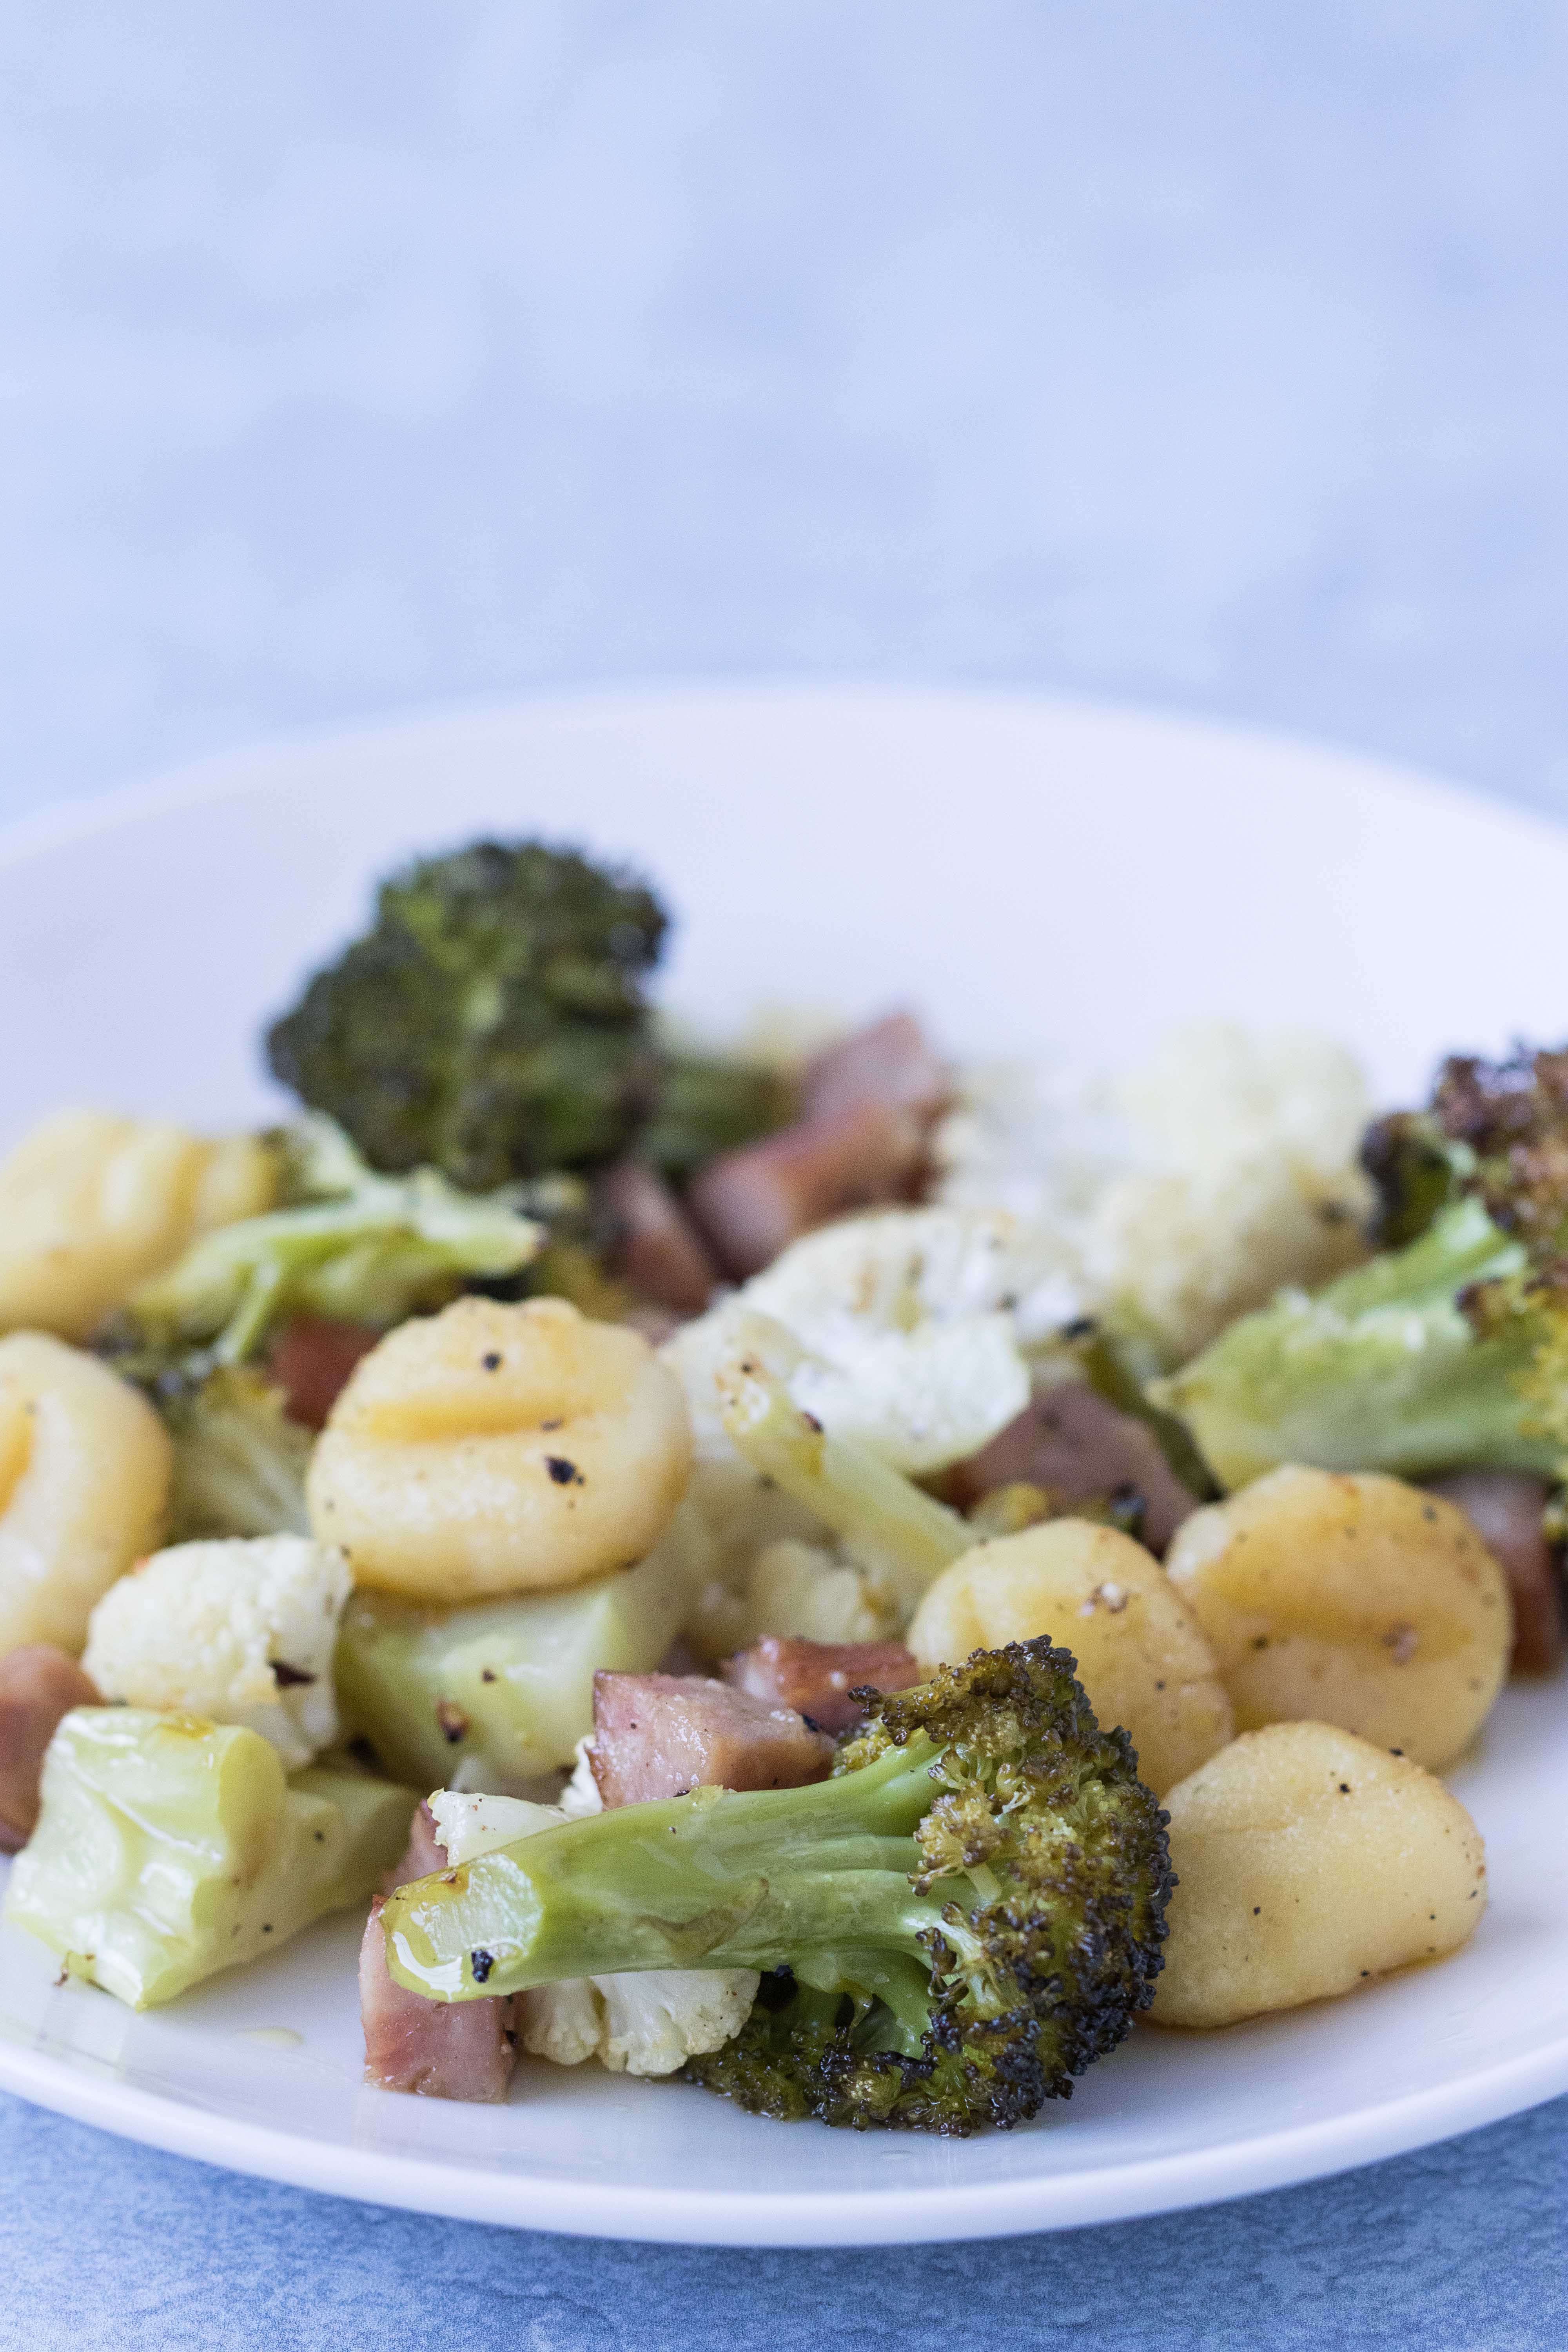 Healthy, family-friendly dinner that comes together in 30 minutes: sheet pan gnocchi with chicken sausage, broccoli, and cauliflower. #healthy #sheetpanmeal #gnocchi | https://www.roseclearfield.com